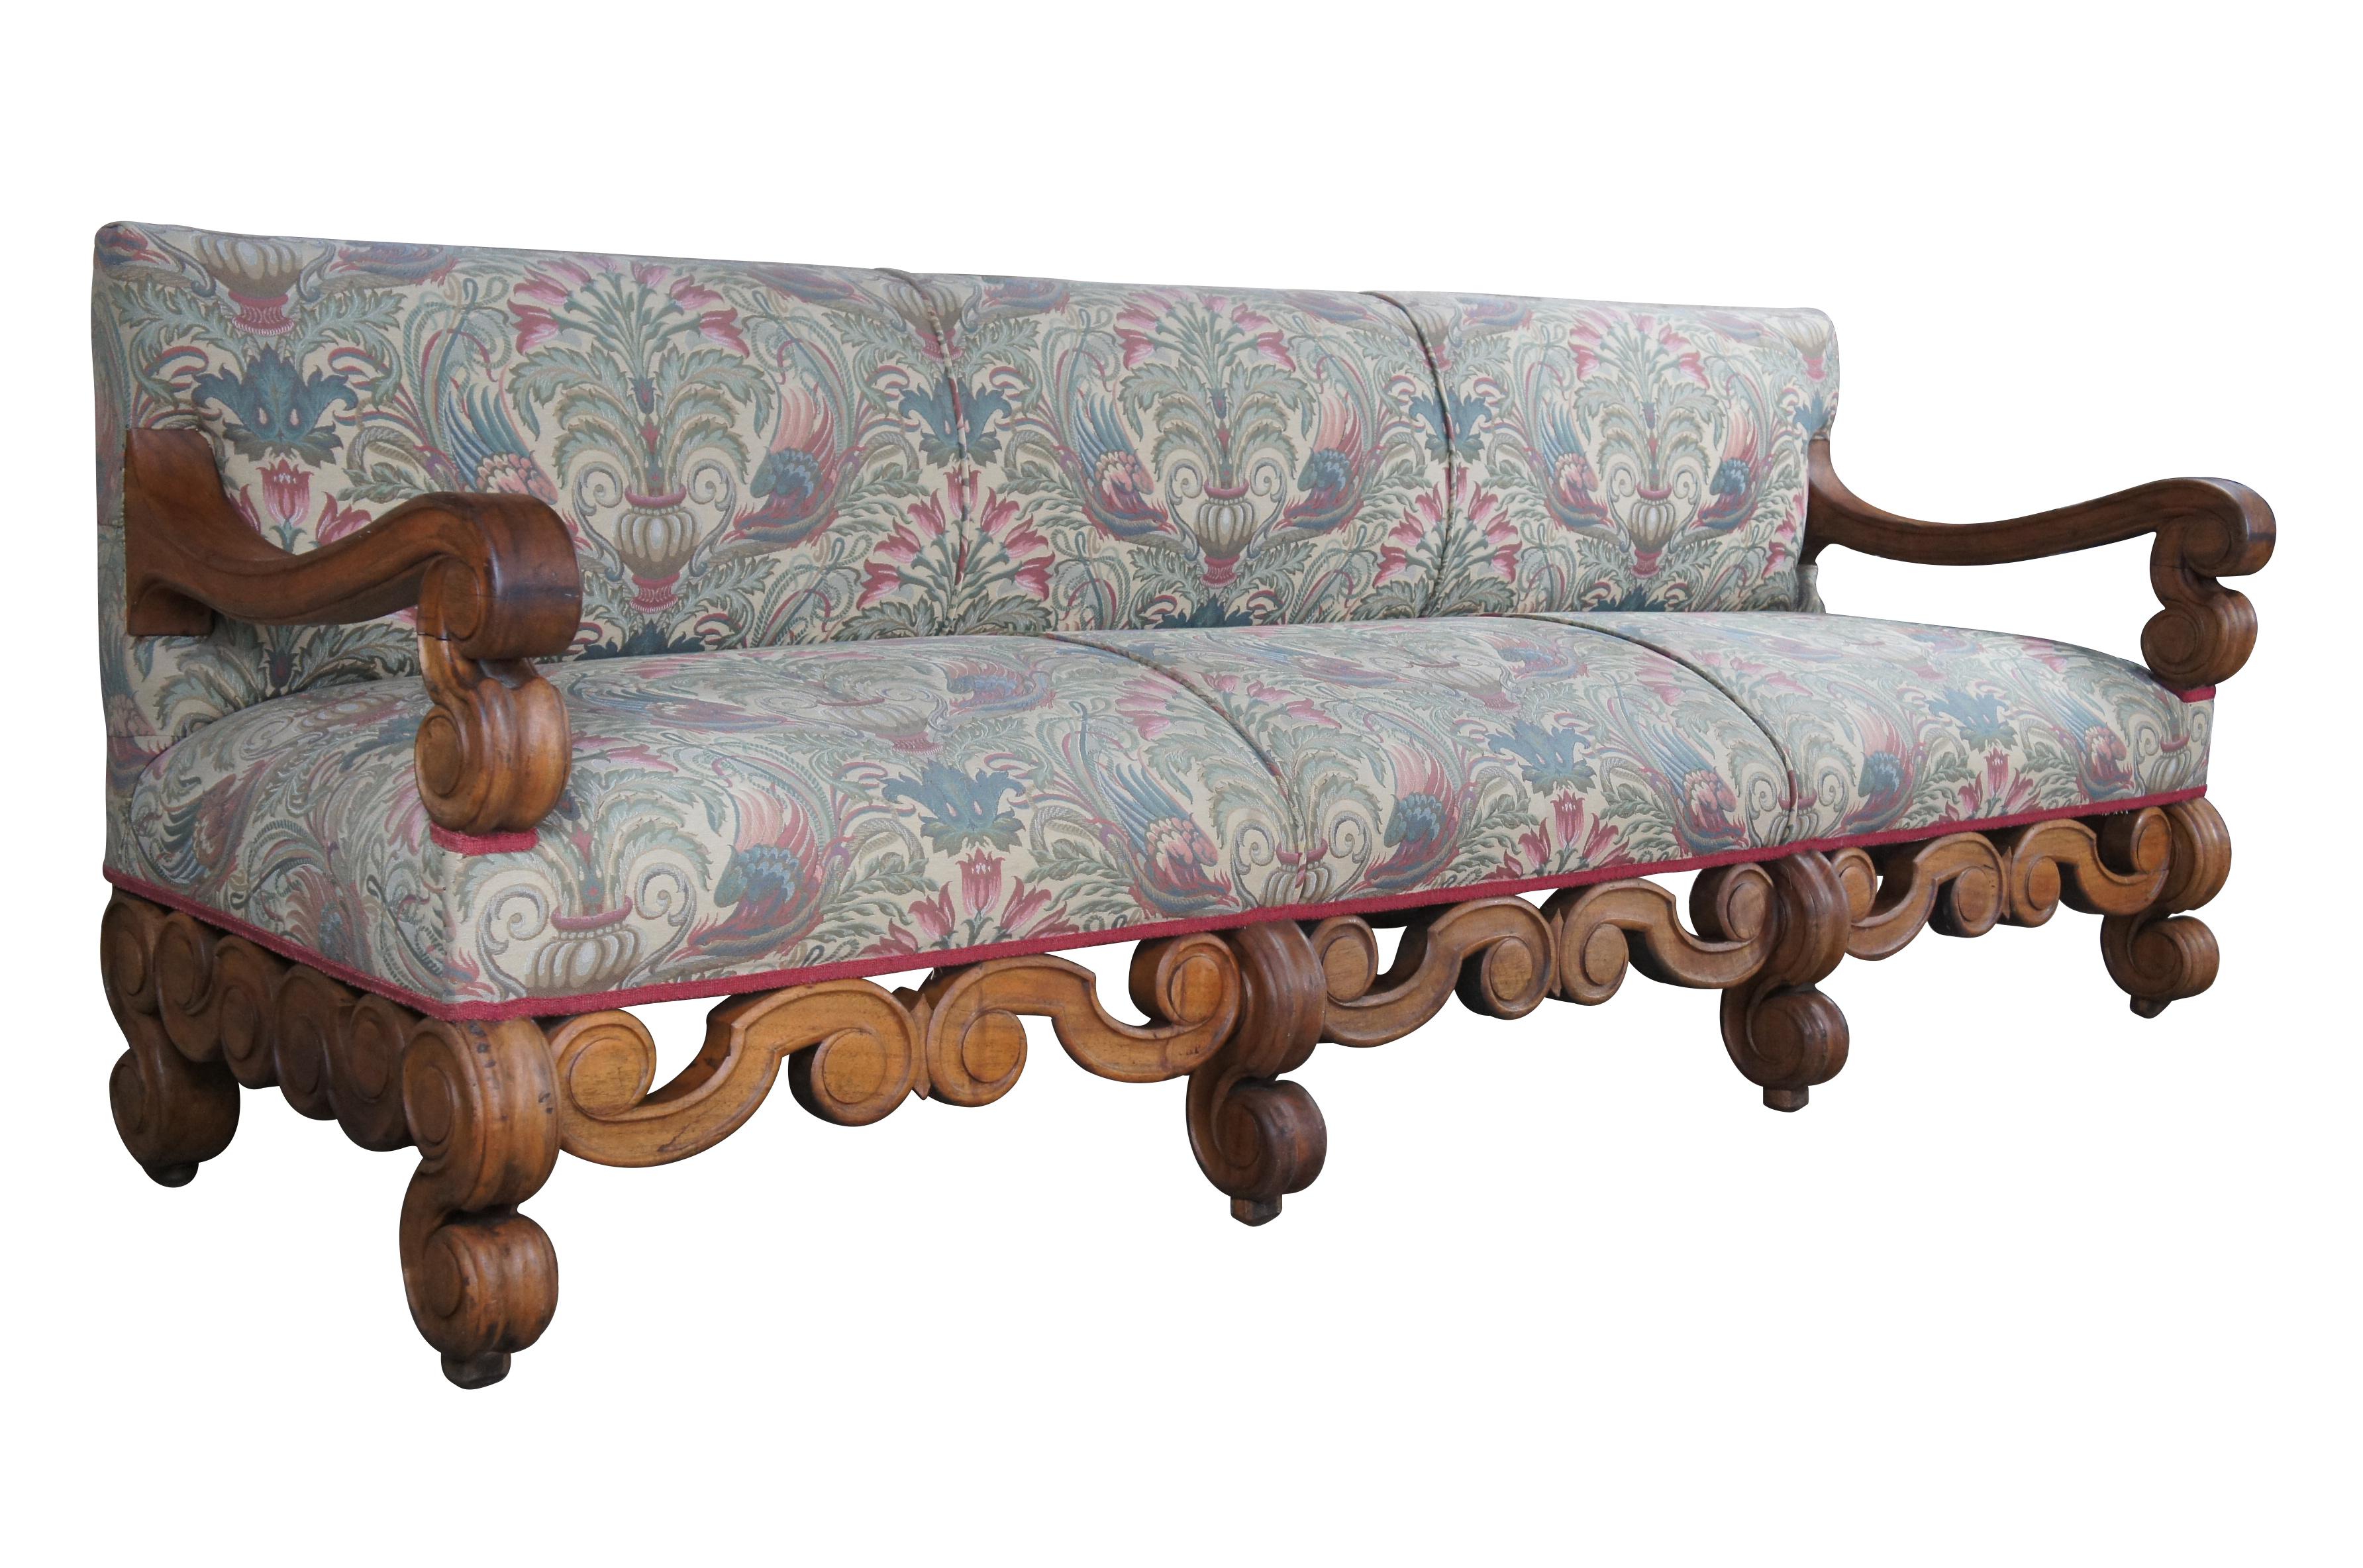 An Impressive William & Mary mahogany Settle or sofa, circa 18th Century.  Featuring heavy scrolled frame with downswept open arms, six legs and Neoclassical floral upholstery.  The beautifully 